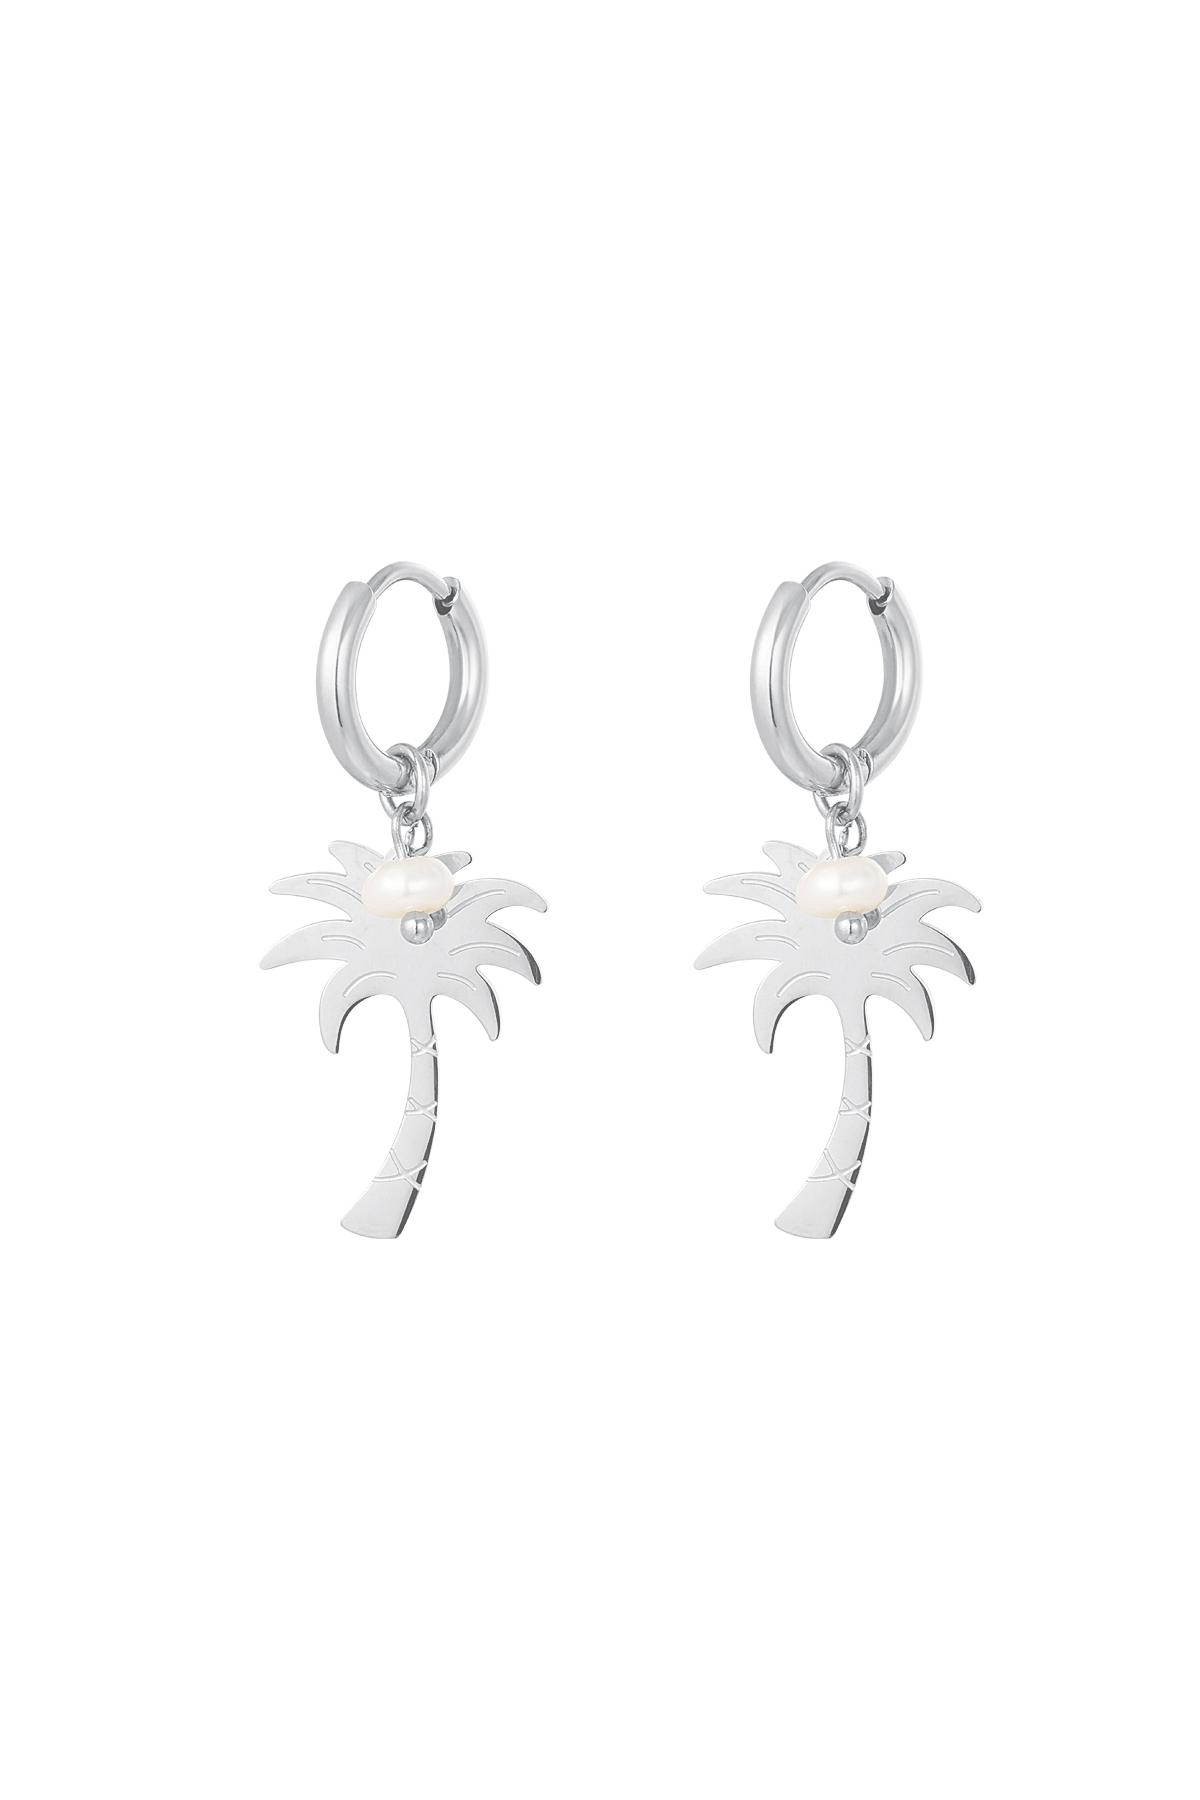 Palm tree earrings - Beach collection Silver Stainless Steel